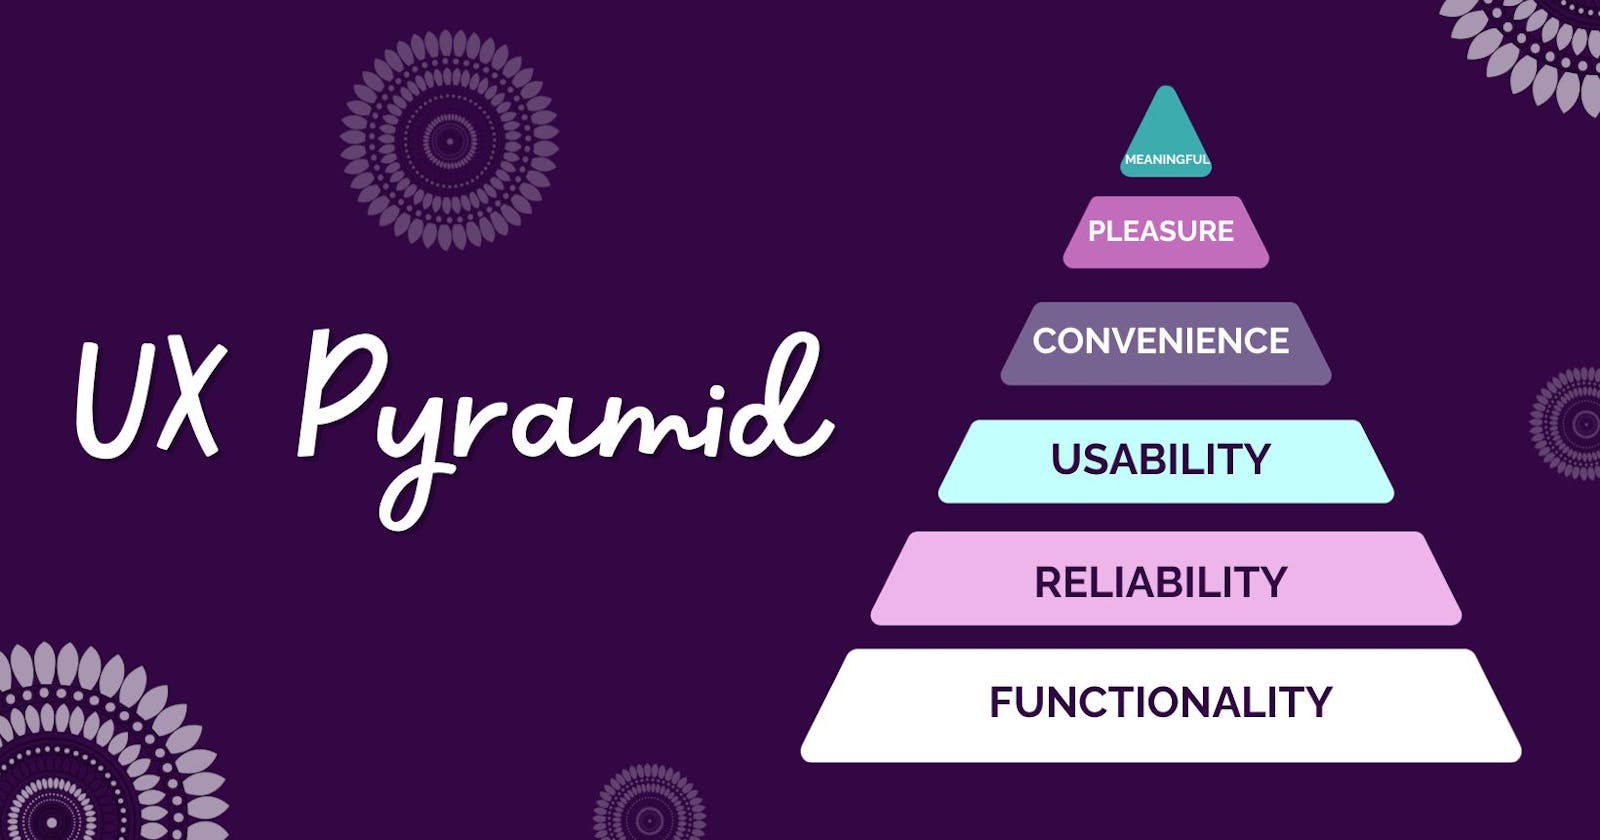 UX Pyramid: A Guideline for Creating a Successful Experience for Users